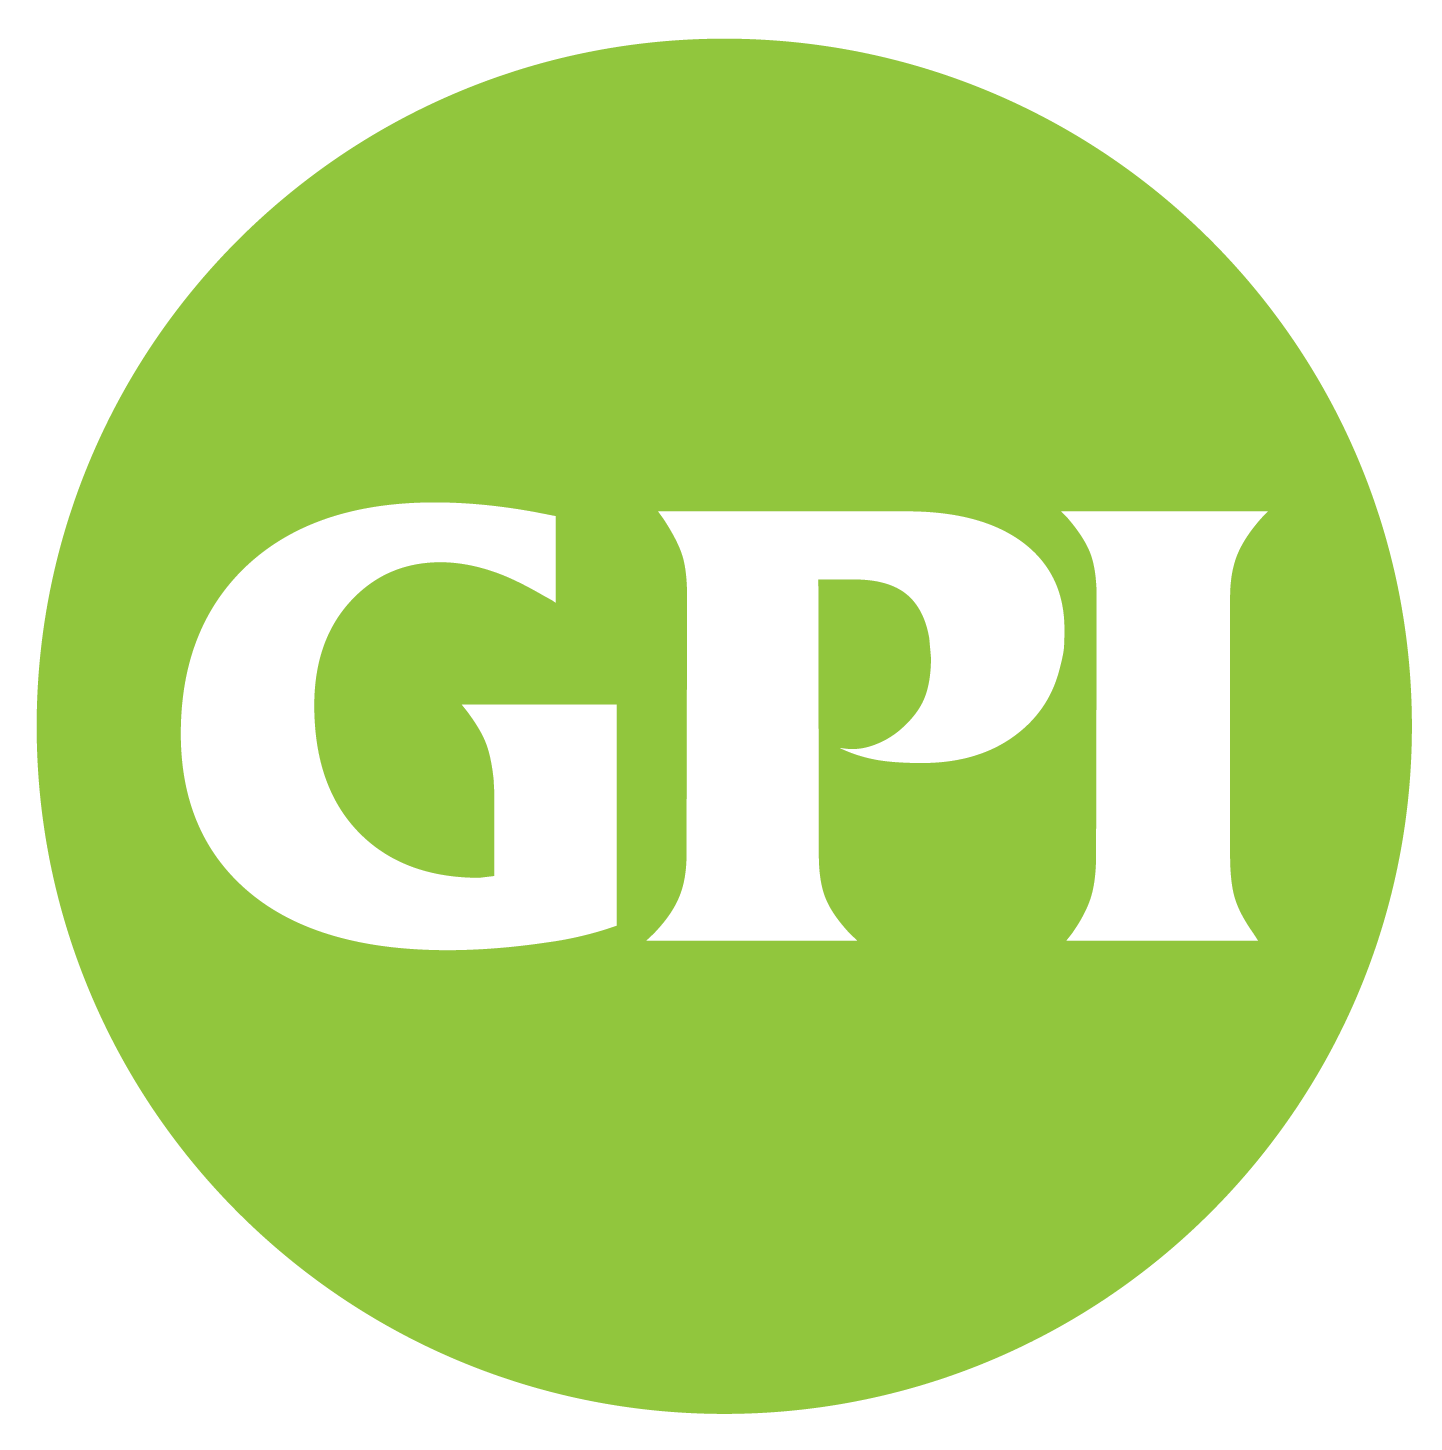 GPI Laboratories, Inc. - GPI Laboratories, Inc. is a full service ISO 17025 accredited materials testing and analytical lab w